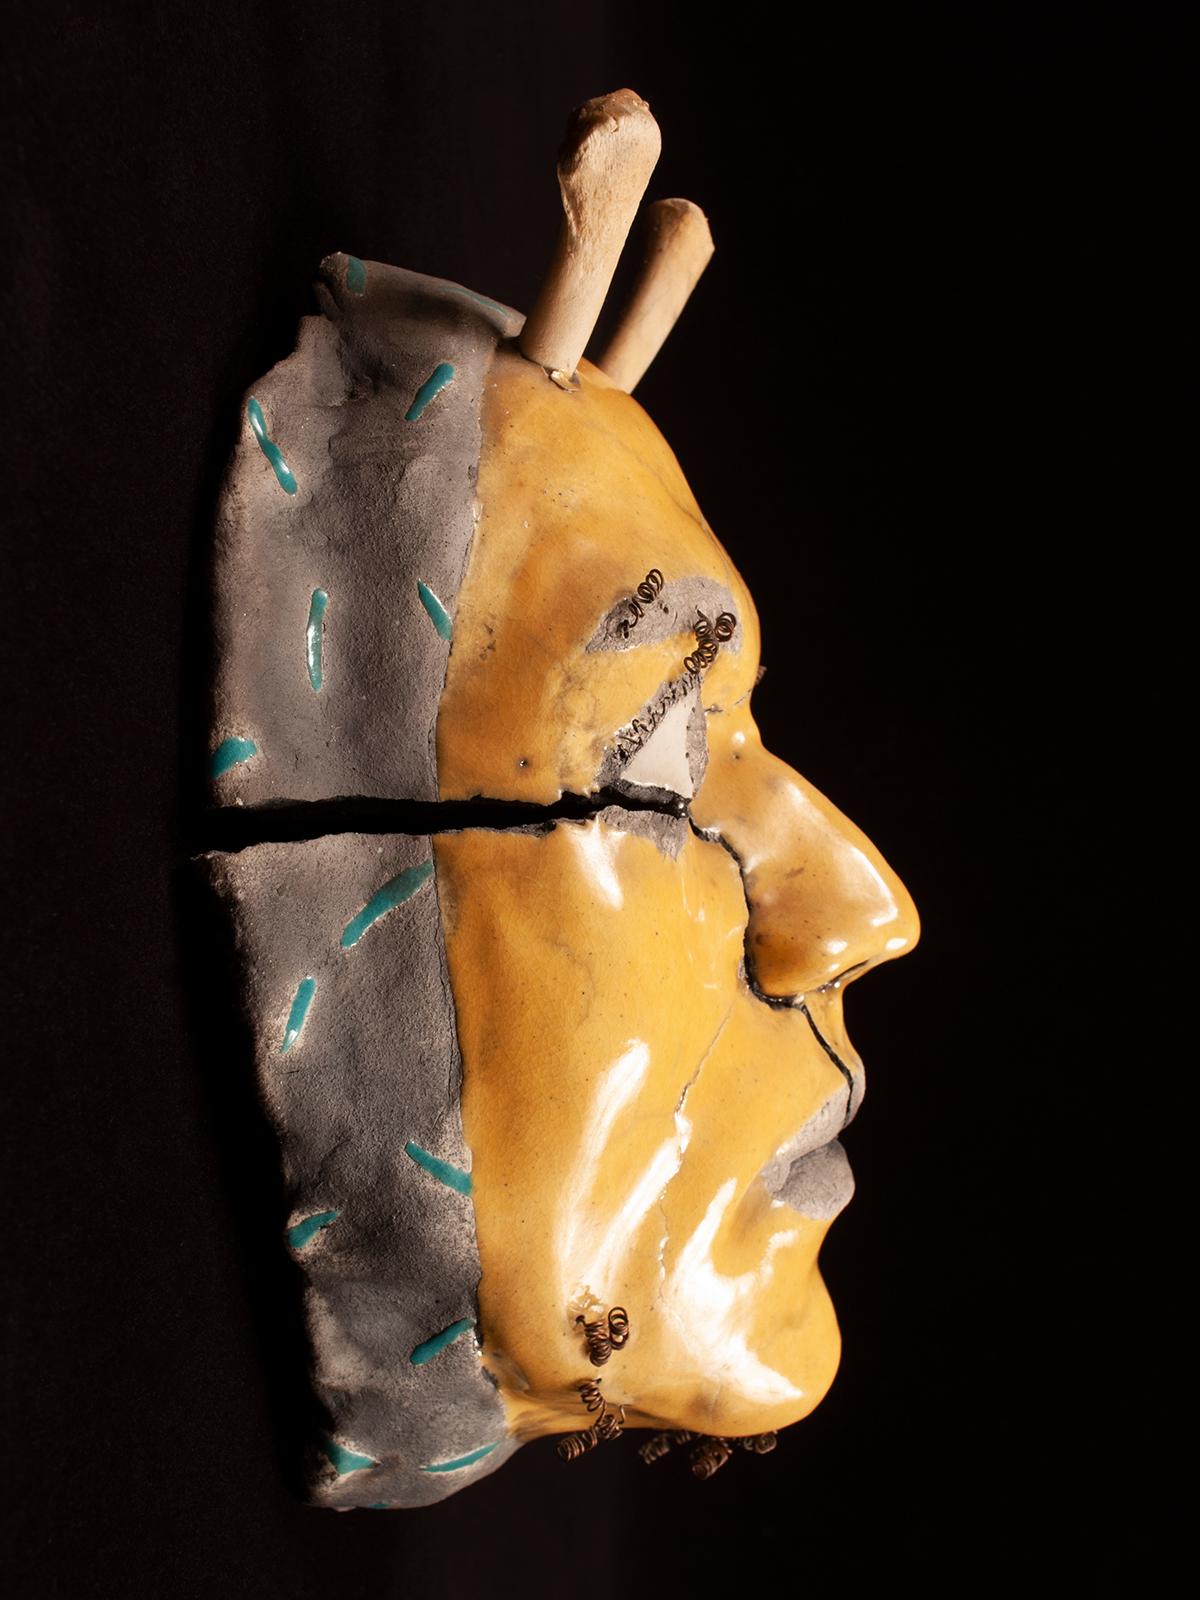 Contemporary Raku ceramic tribal mask with antlers by Argon

A raku fired ceramic mask by the artist Argon, purchased in the 1980s at Galleria de la Raza in San Francisco. The expression is one of wonder, with pupils of African trade beads and